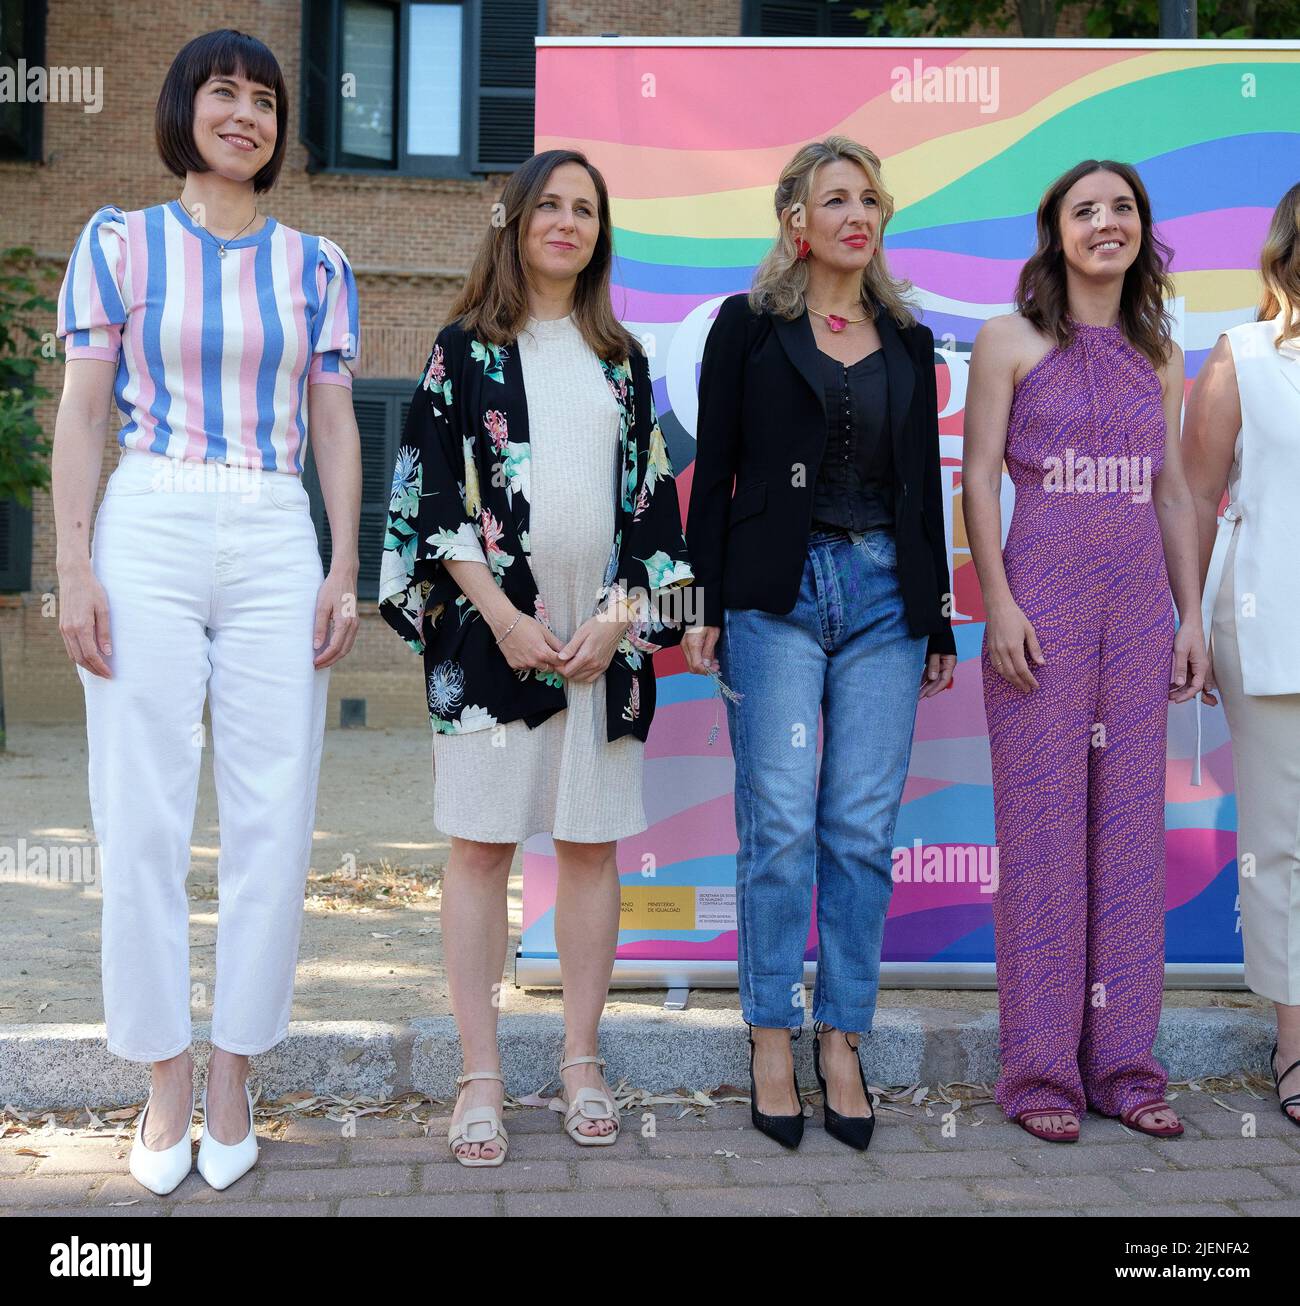 (L-R) The Minister of Science and Innovation, Diana Morant; the Minister of Social Rights and Agenda 2030, Ione Belarra; the Second Vice-President of the Government and Minister of Labor, Yolanda Diaz and the Minister of Equality, Irene Montero during the 2nd edition of the Rainbow Awards for the International LGTBI Pride Day, on 27 June, 2022 in Madrid, Spain. Under the slogan 'Orgullo de Pais' (Country Pride), the campaign has as its main piece a poster that in this edition incorporates the novelty of having a dynamic version and a static version. With this campaign, the Ministry of Equality Stock Photo